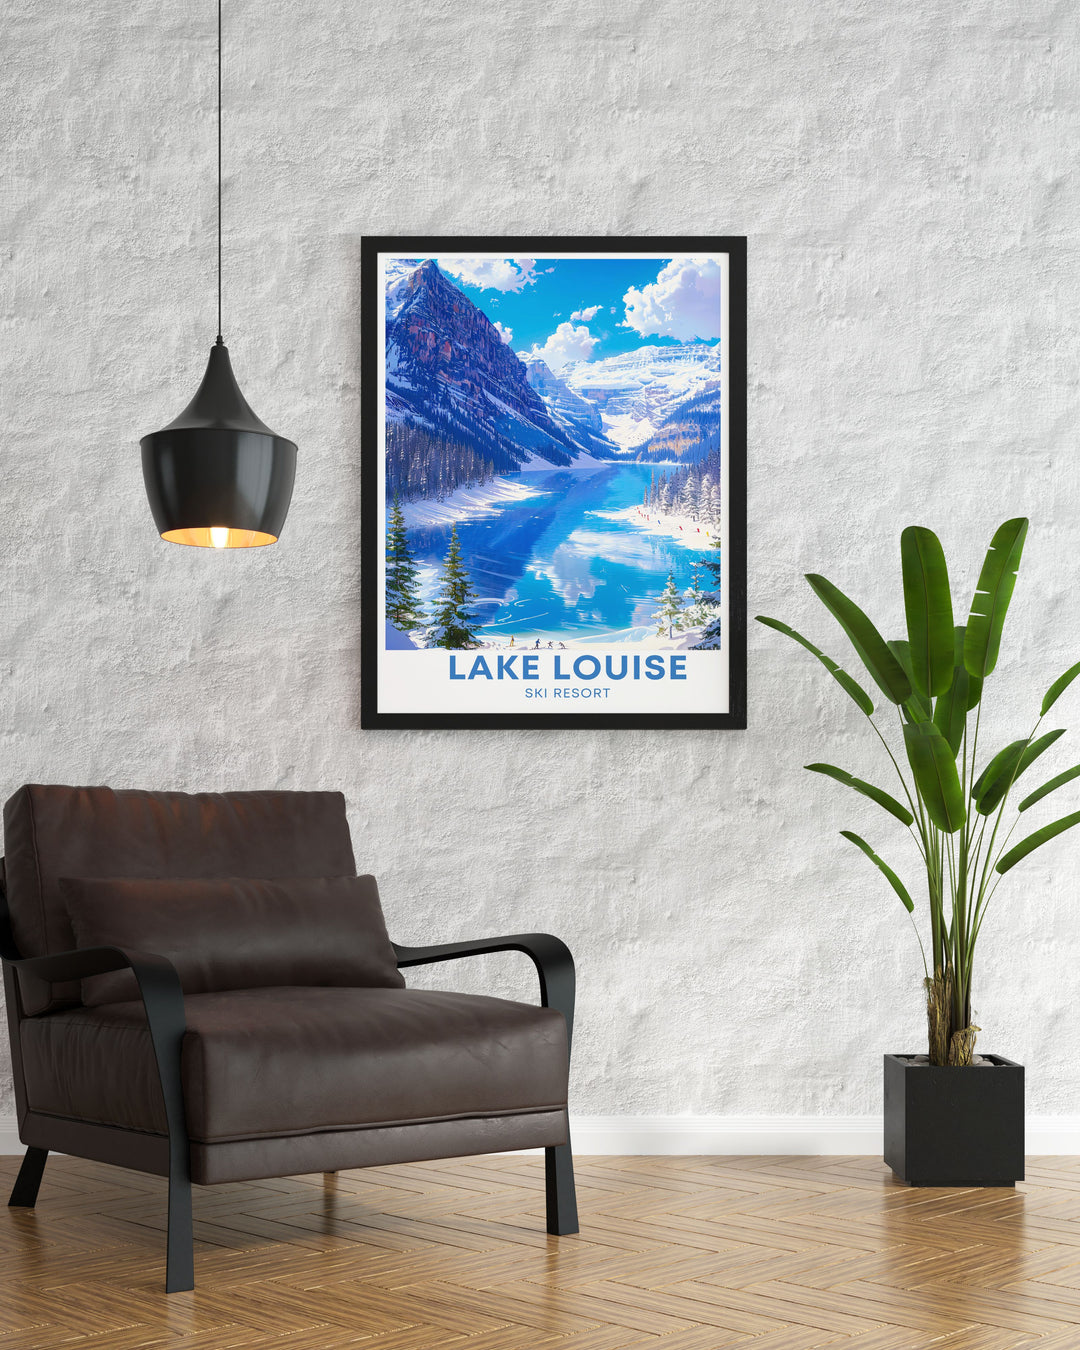 This travel poster showcases the excitement and beauty of Lake Louise Ski Resort, inviting viewers to imagine skiing down the slopes of the Canadian Rockies.